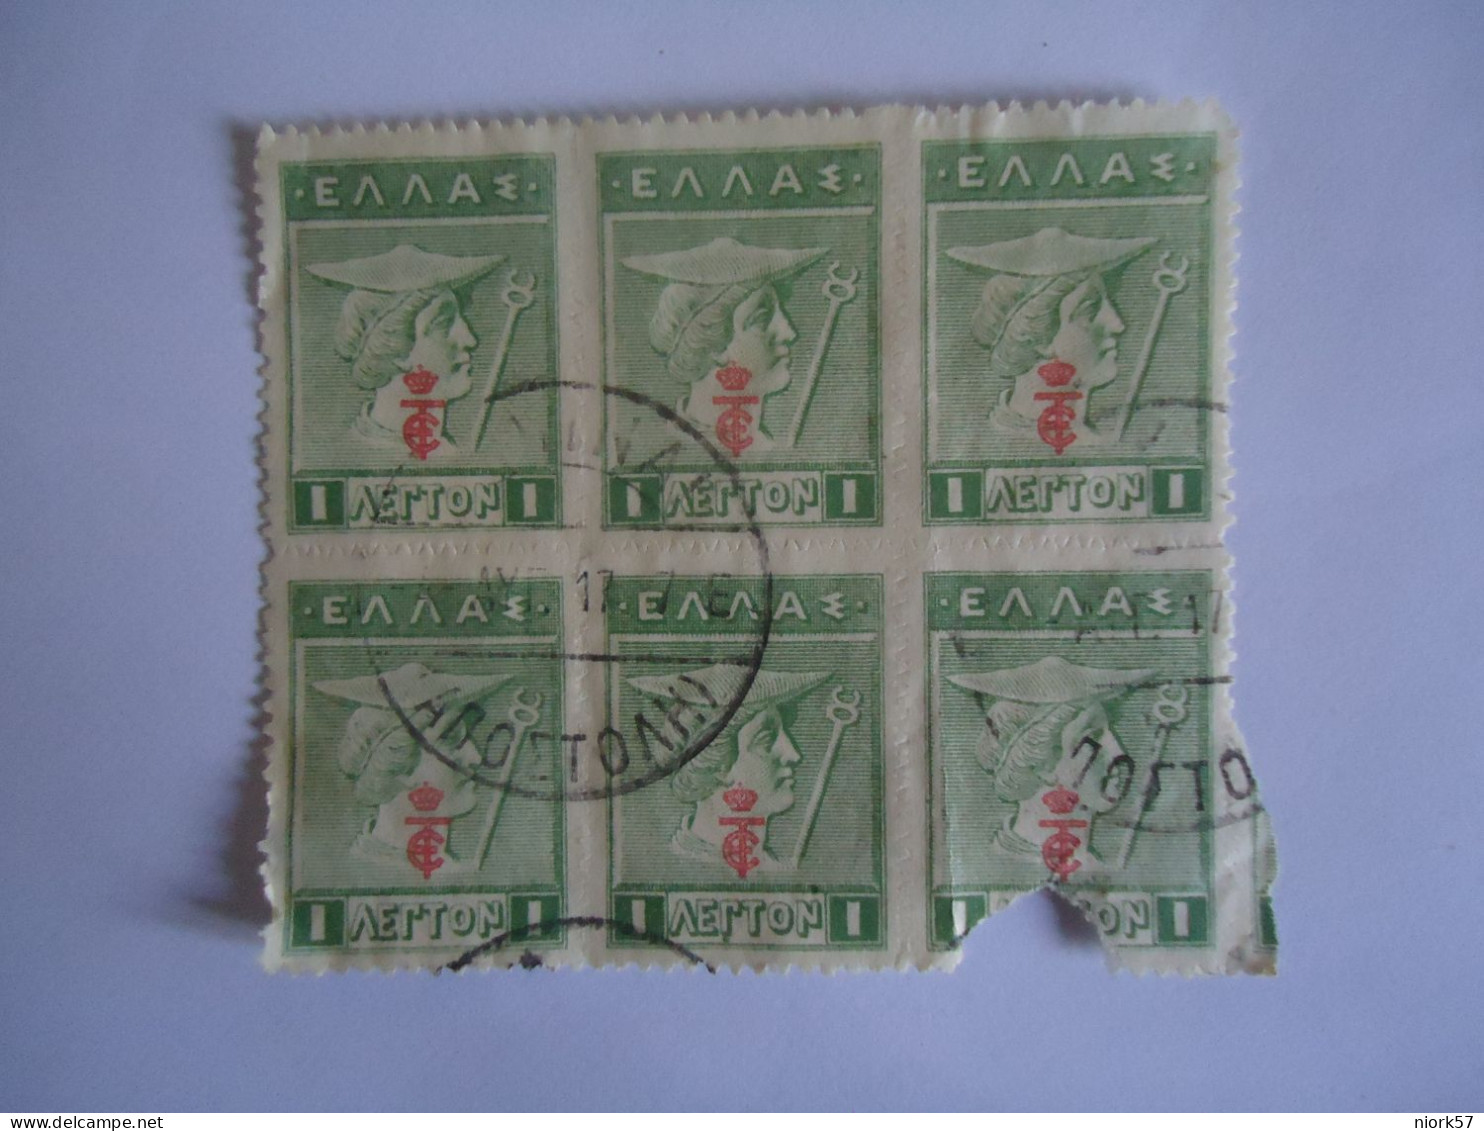 GREECE USED STAMPS 1923 ΕΤ OVERPRINT   BLOCK OF 6 POSTMARK  ΑΘΗΝΑΙ - Used Stamps